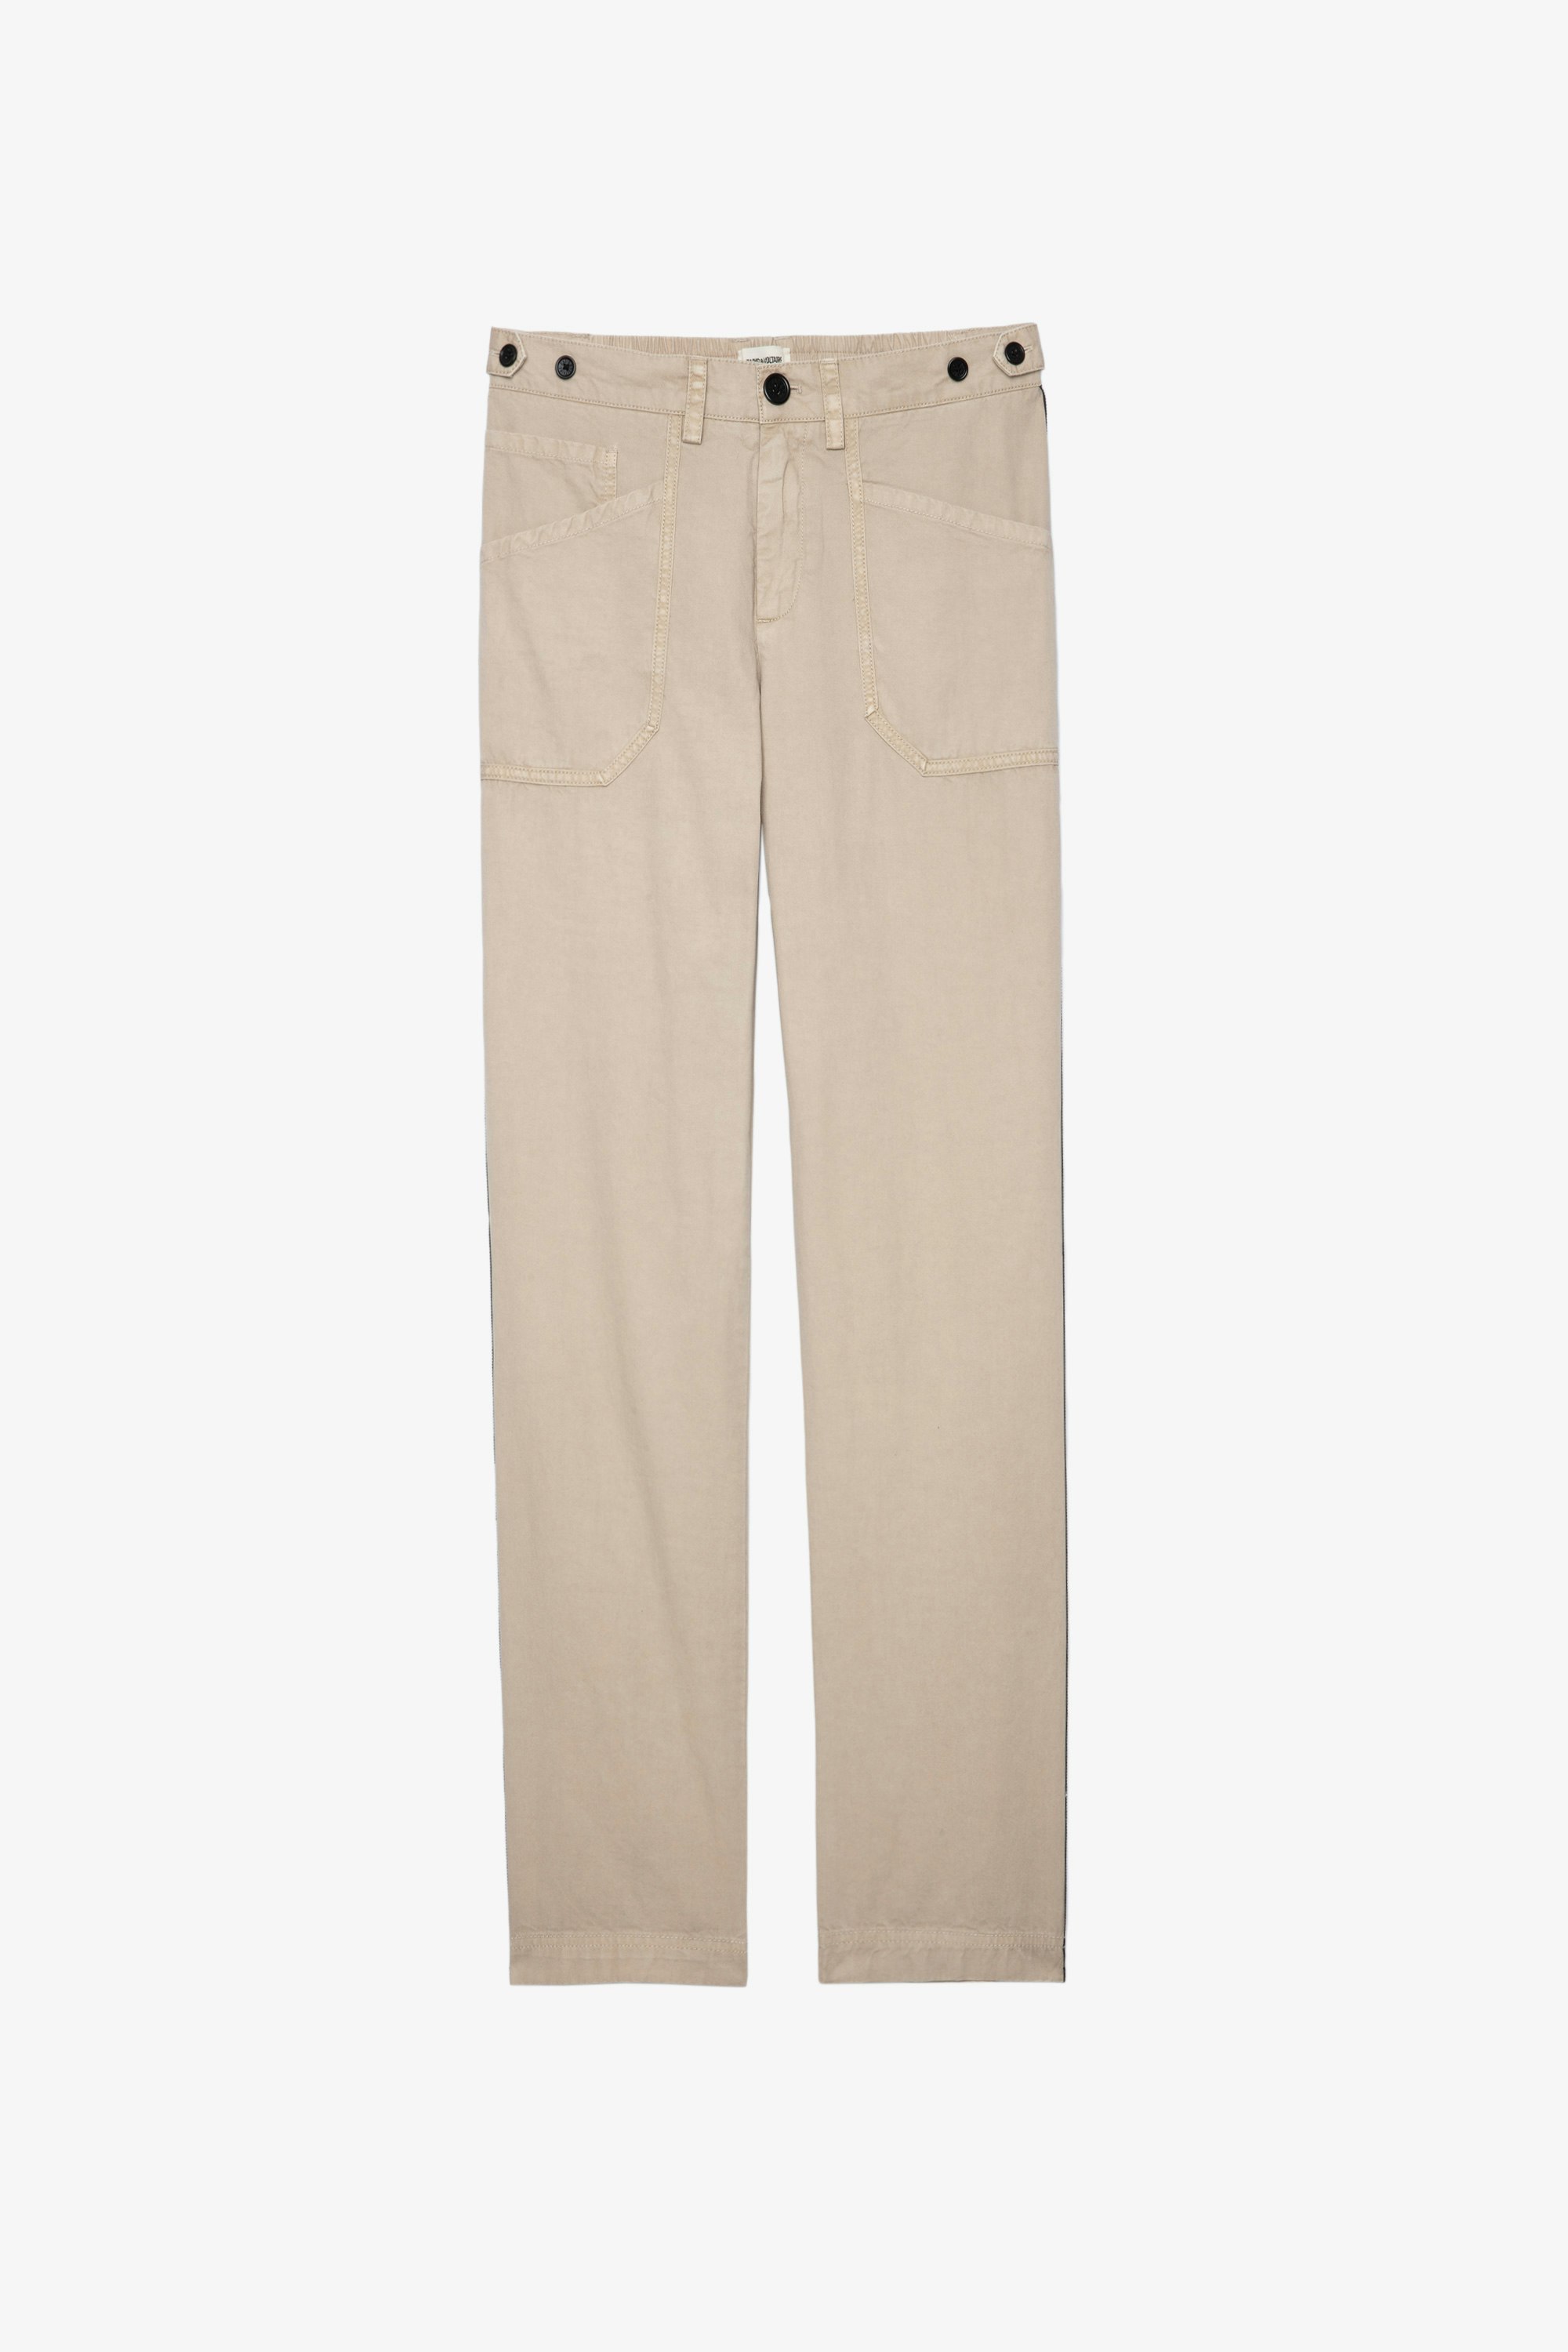 Pamela Trousers Women’s beige cotton trousers with bands on the sides